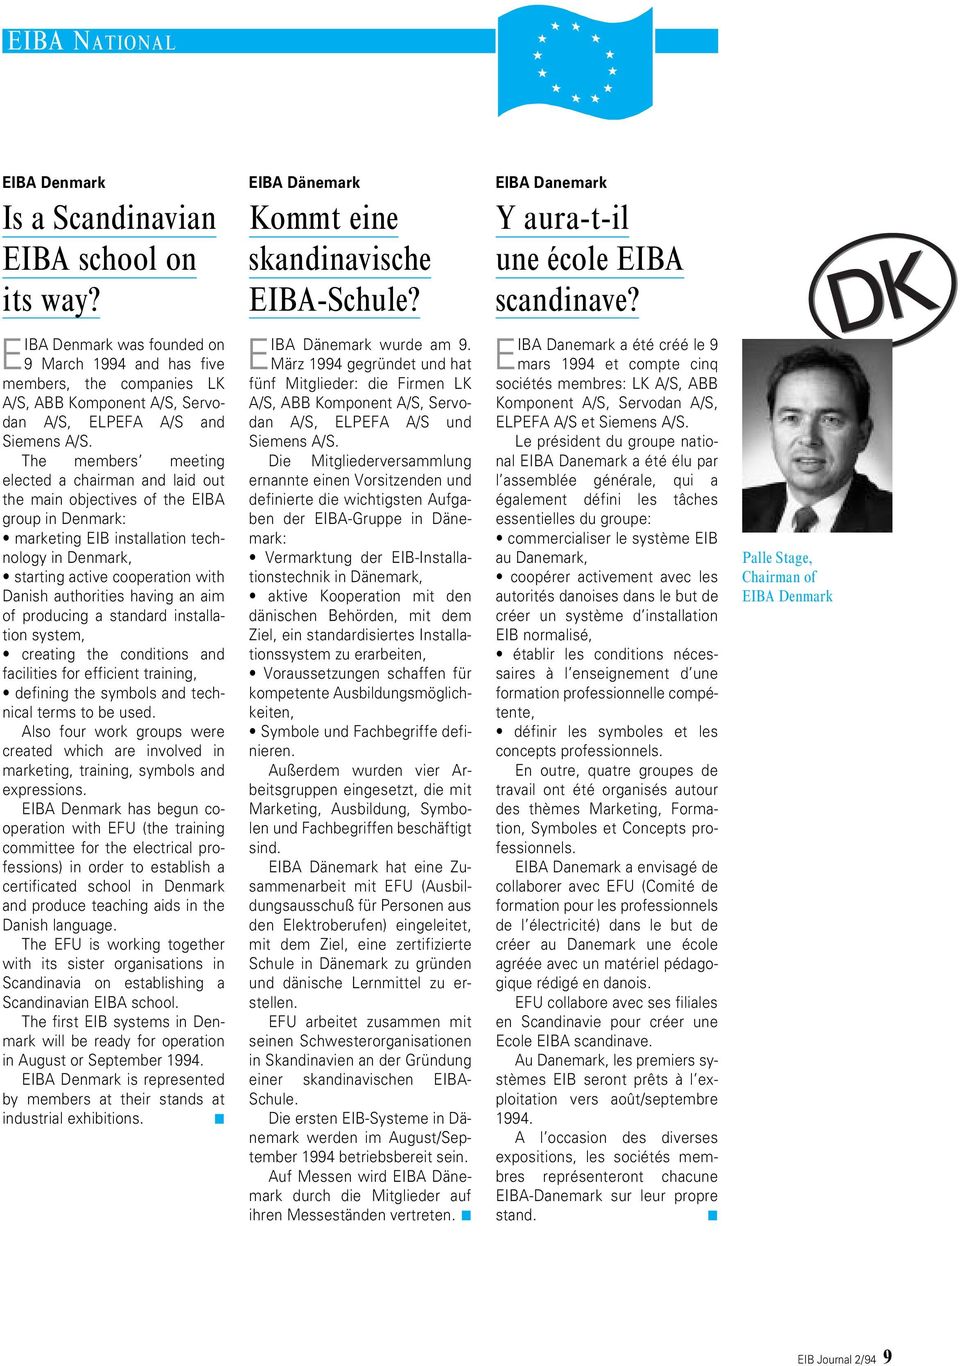 The members meeting elected a chairman and laid out the main objectives of the EIBA group in Denmark: marketing EIB installation technology in Denmark, starting active cooperation with Danish